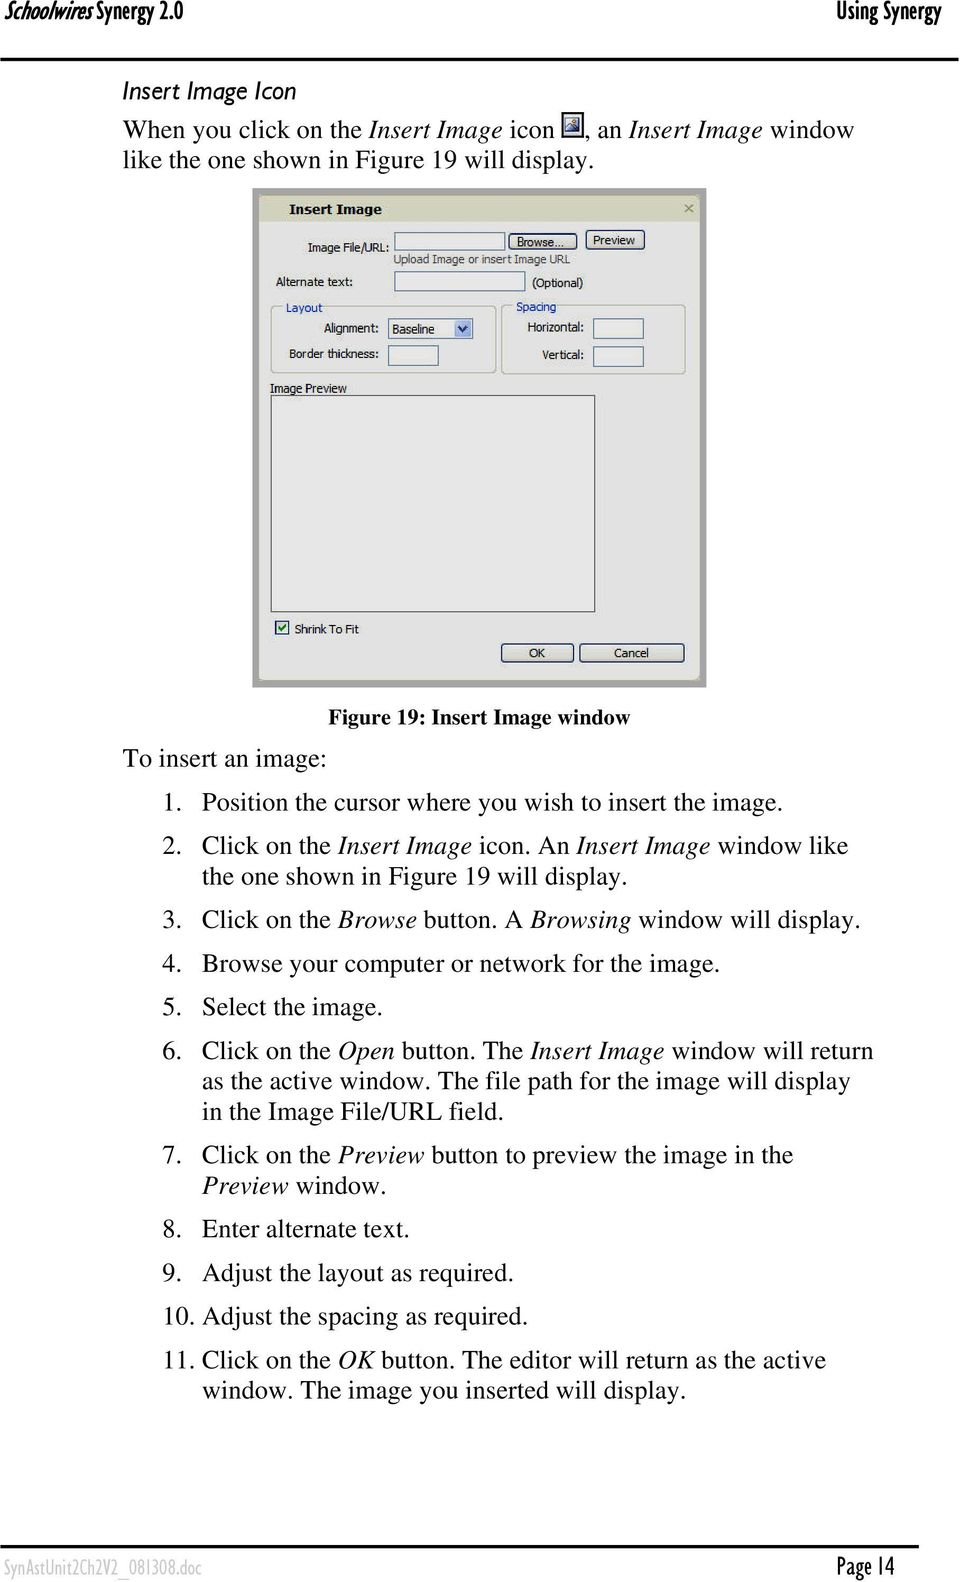 A Browsing window will display. 4. Browse your computer or network for the image. 5. Select the image. 6. Click on the Open button. The Insert Image window will return as the active window.